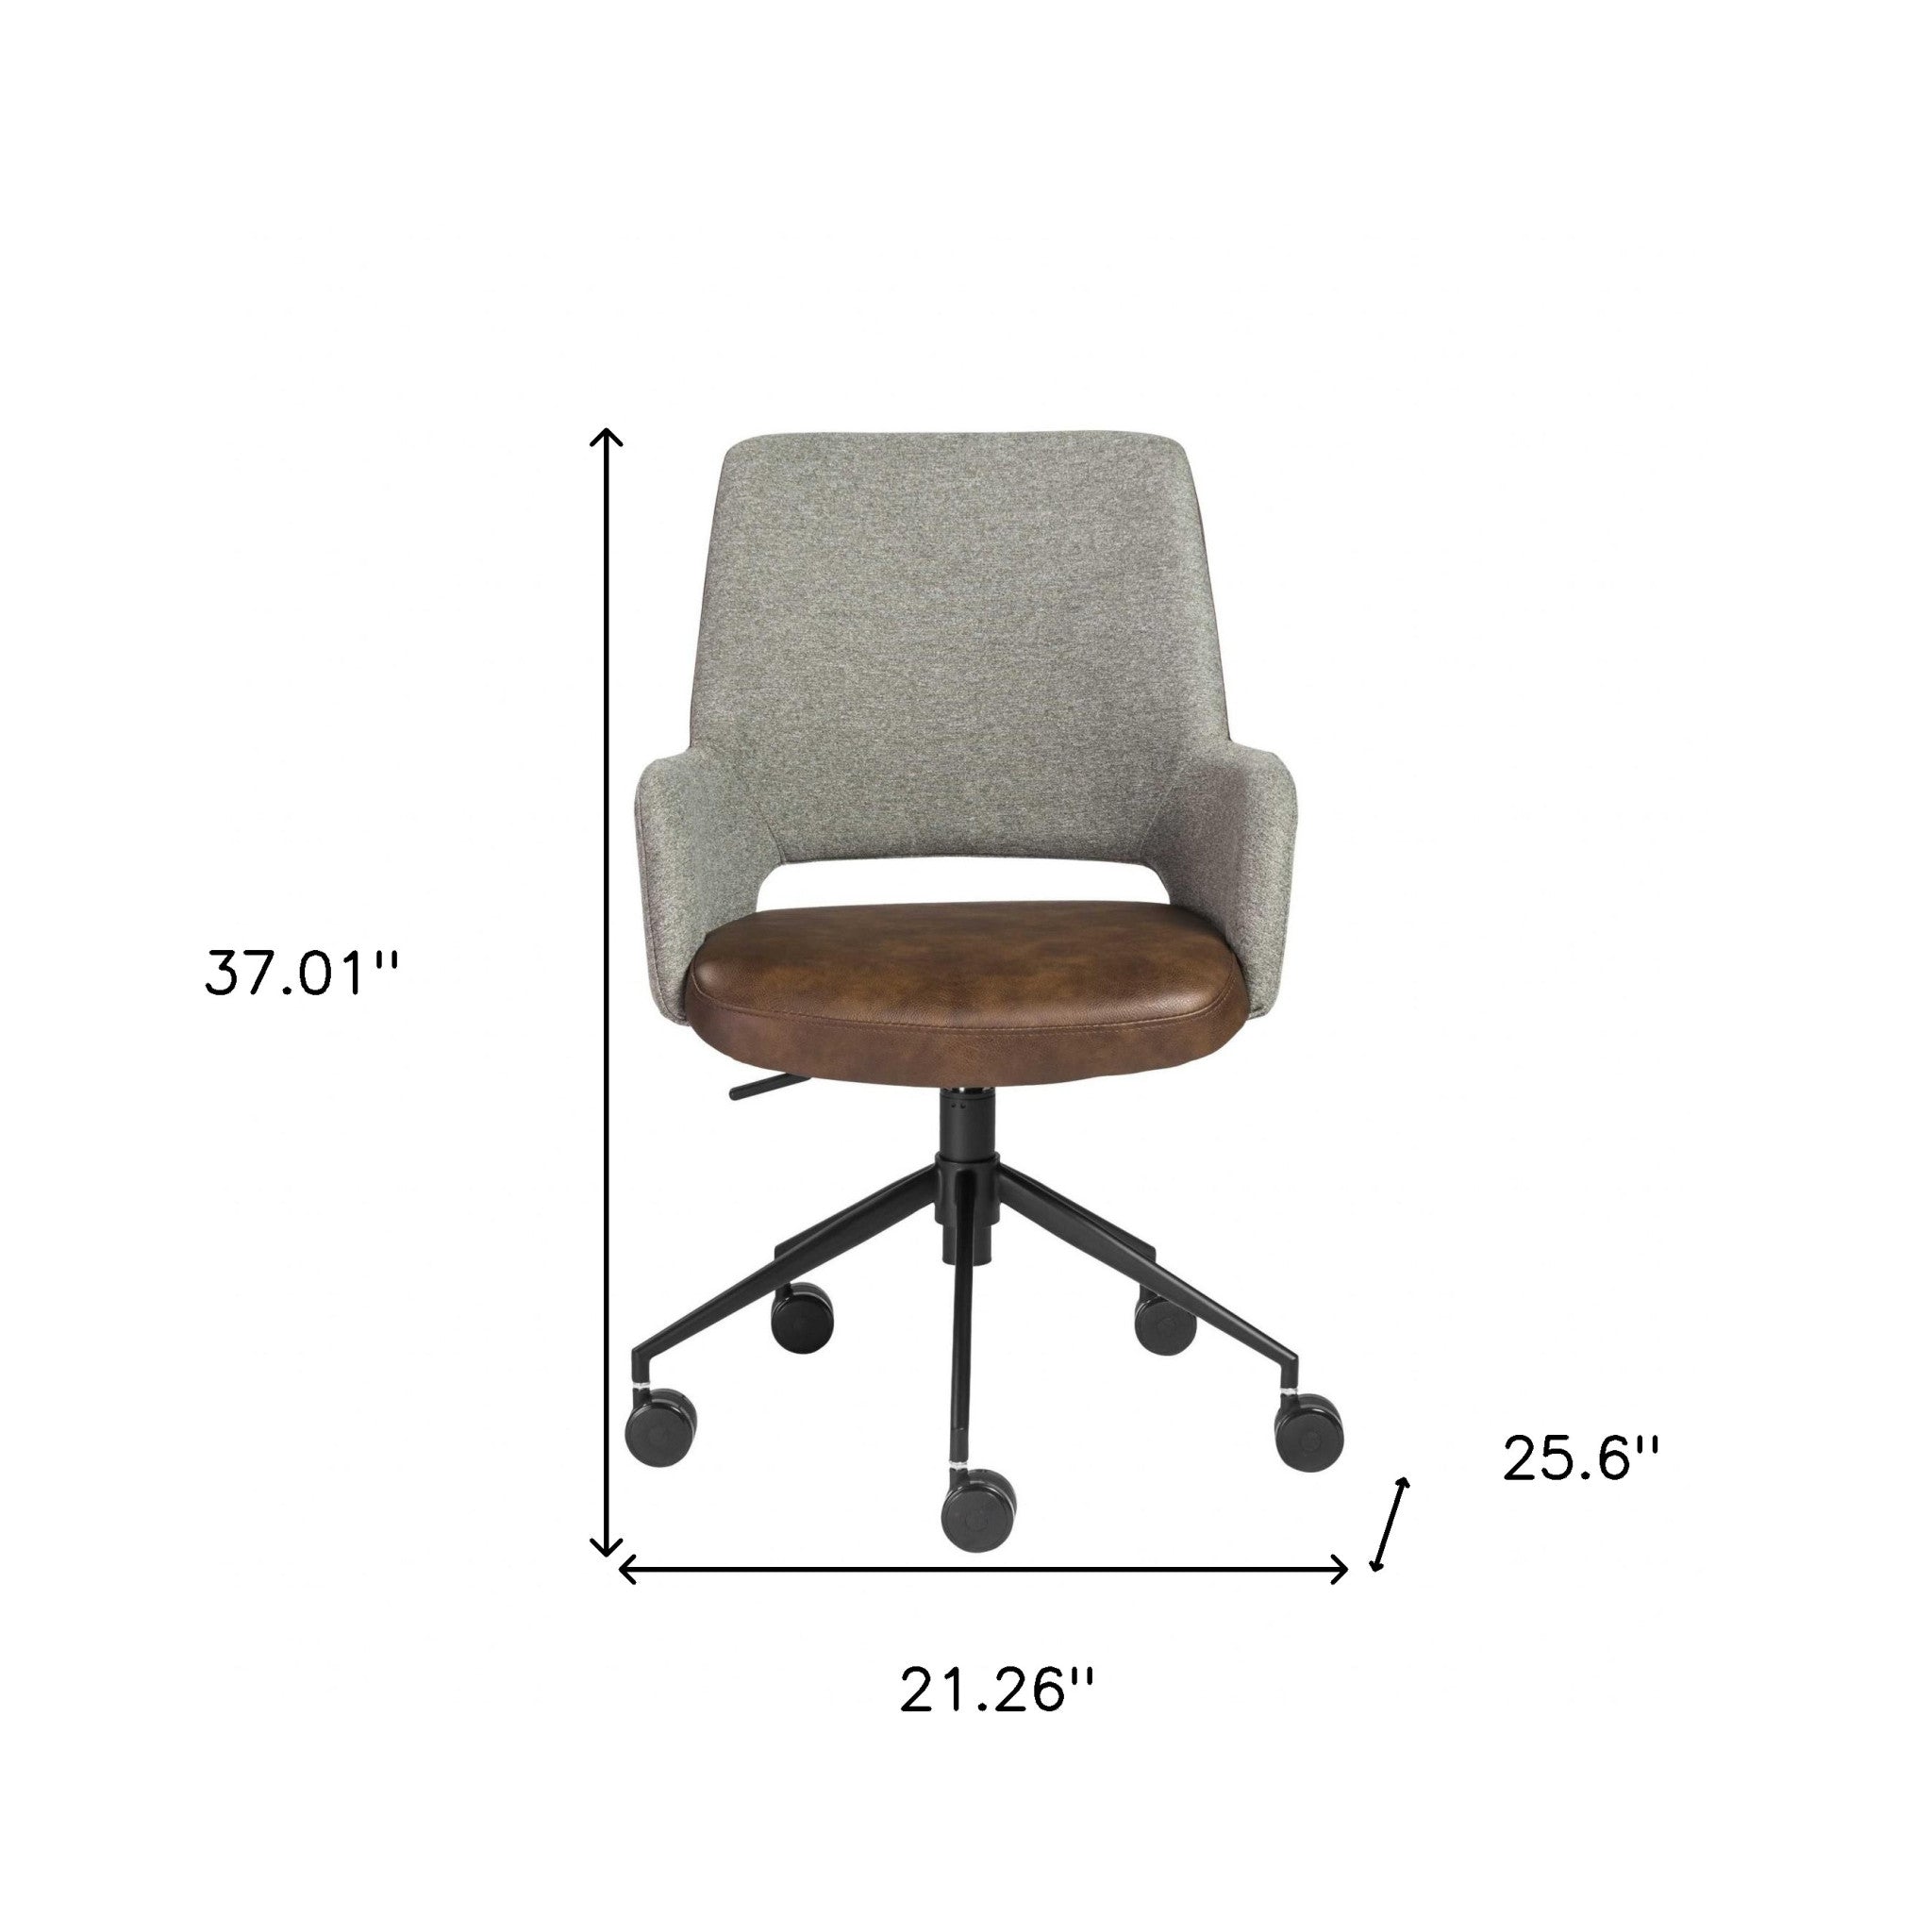 21.26" X 25.60" X 37.21" Tilt Office Chair In Gray Fabric And Light Brown Leatherette With Black Base